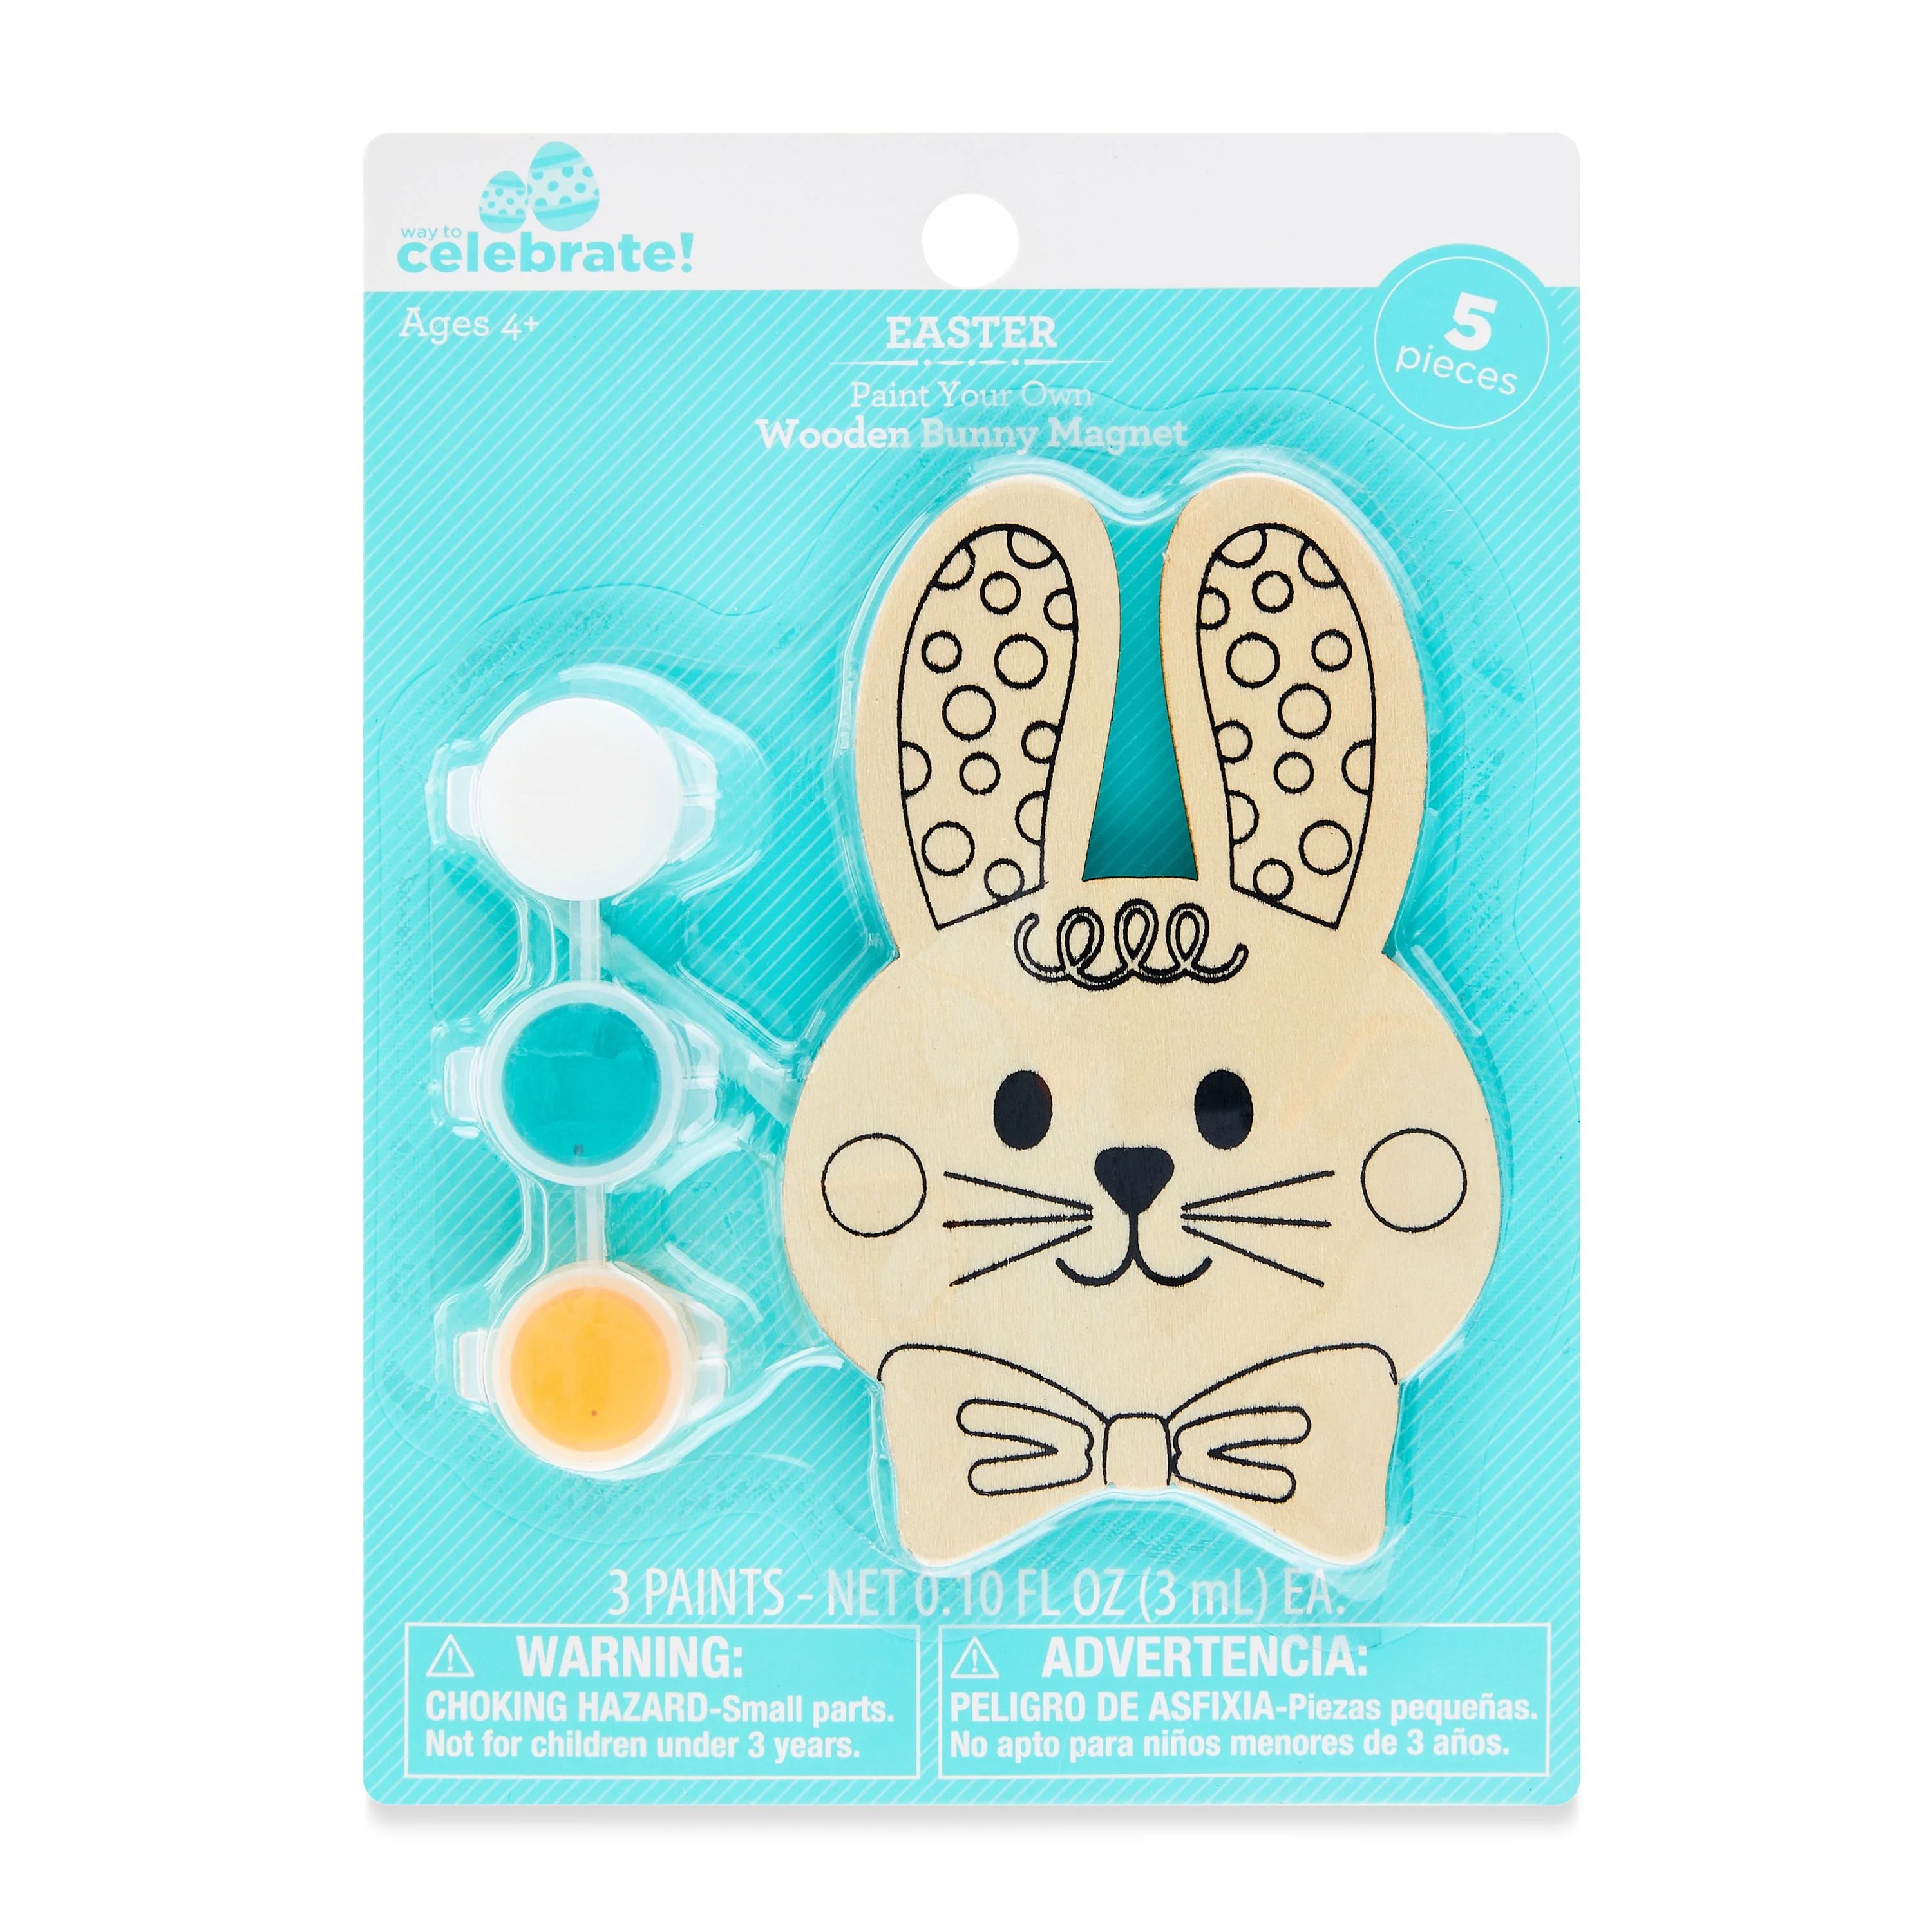 Easter Paint Your Own Wooden Bunny Magnet, by Way To Celebrate | Walmart (US)